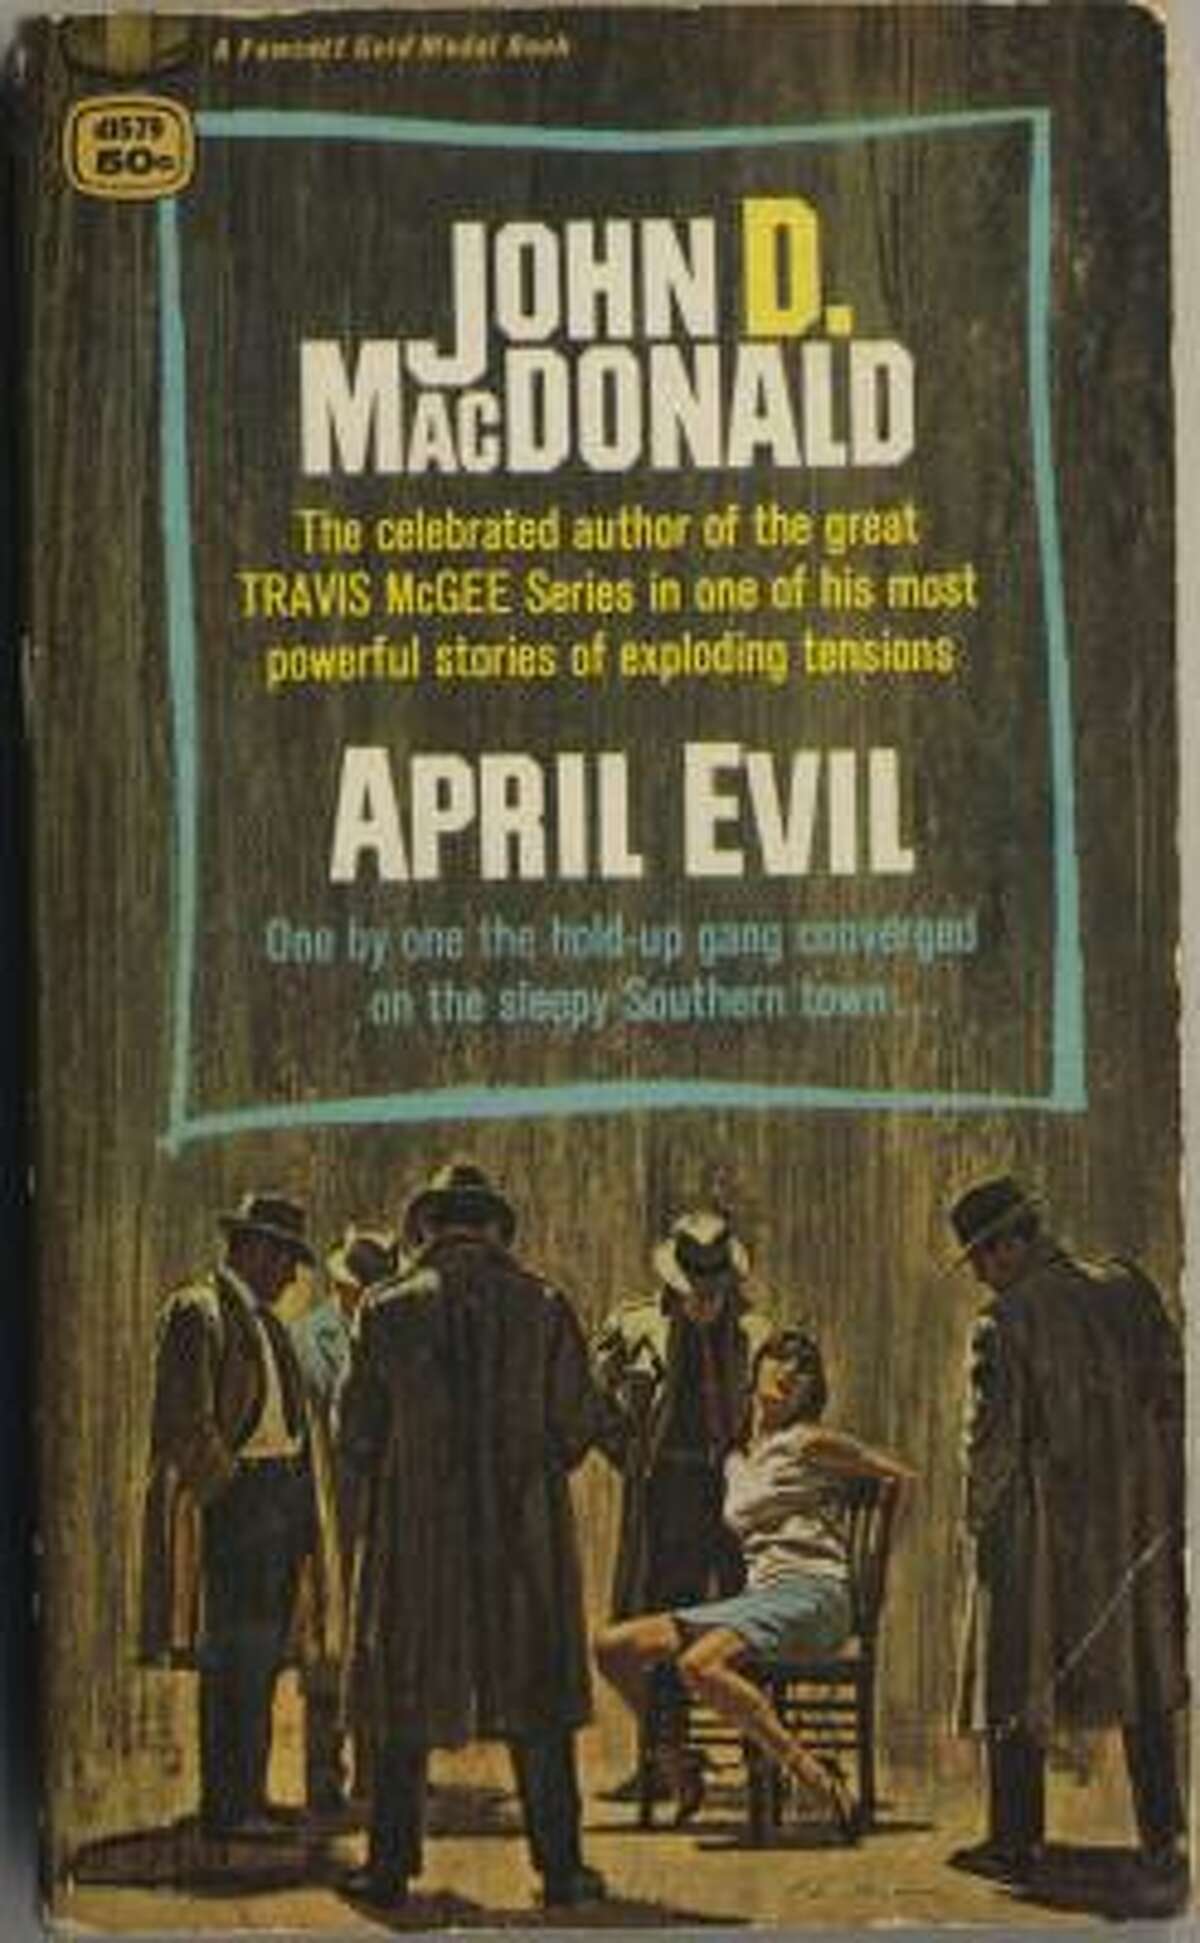 April Evil: Like many paperback crime writers, John D. MacDonald started in pulps. Unlike most, he eventually moved to best-selling hardbacks. But his most famous work were paperbacks like this and his 21 book Travis McGee series.